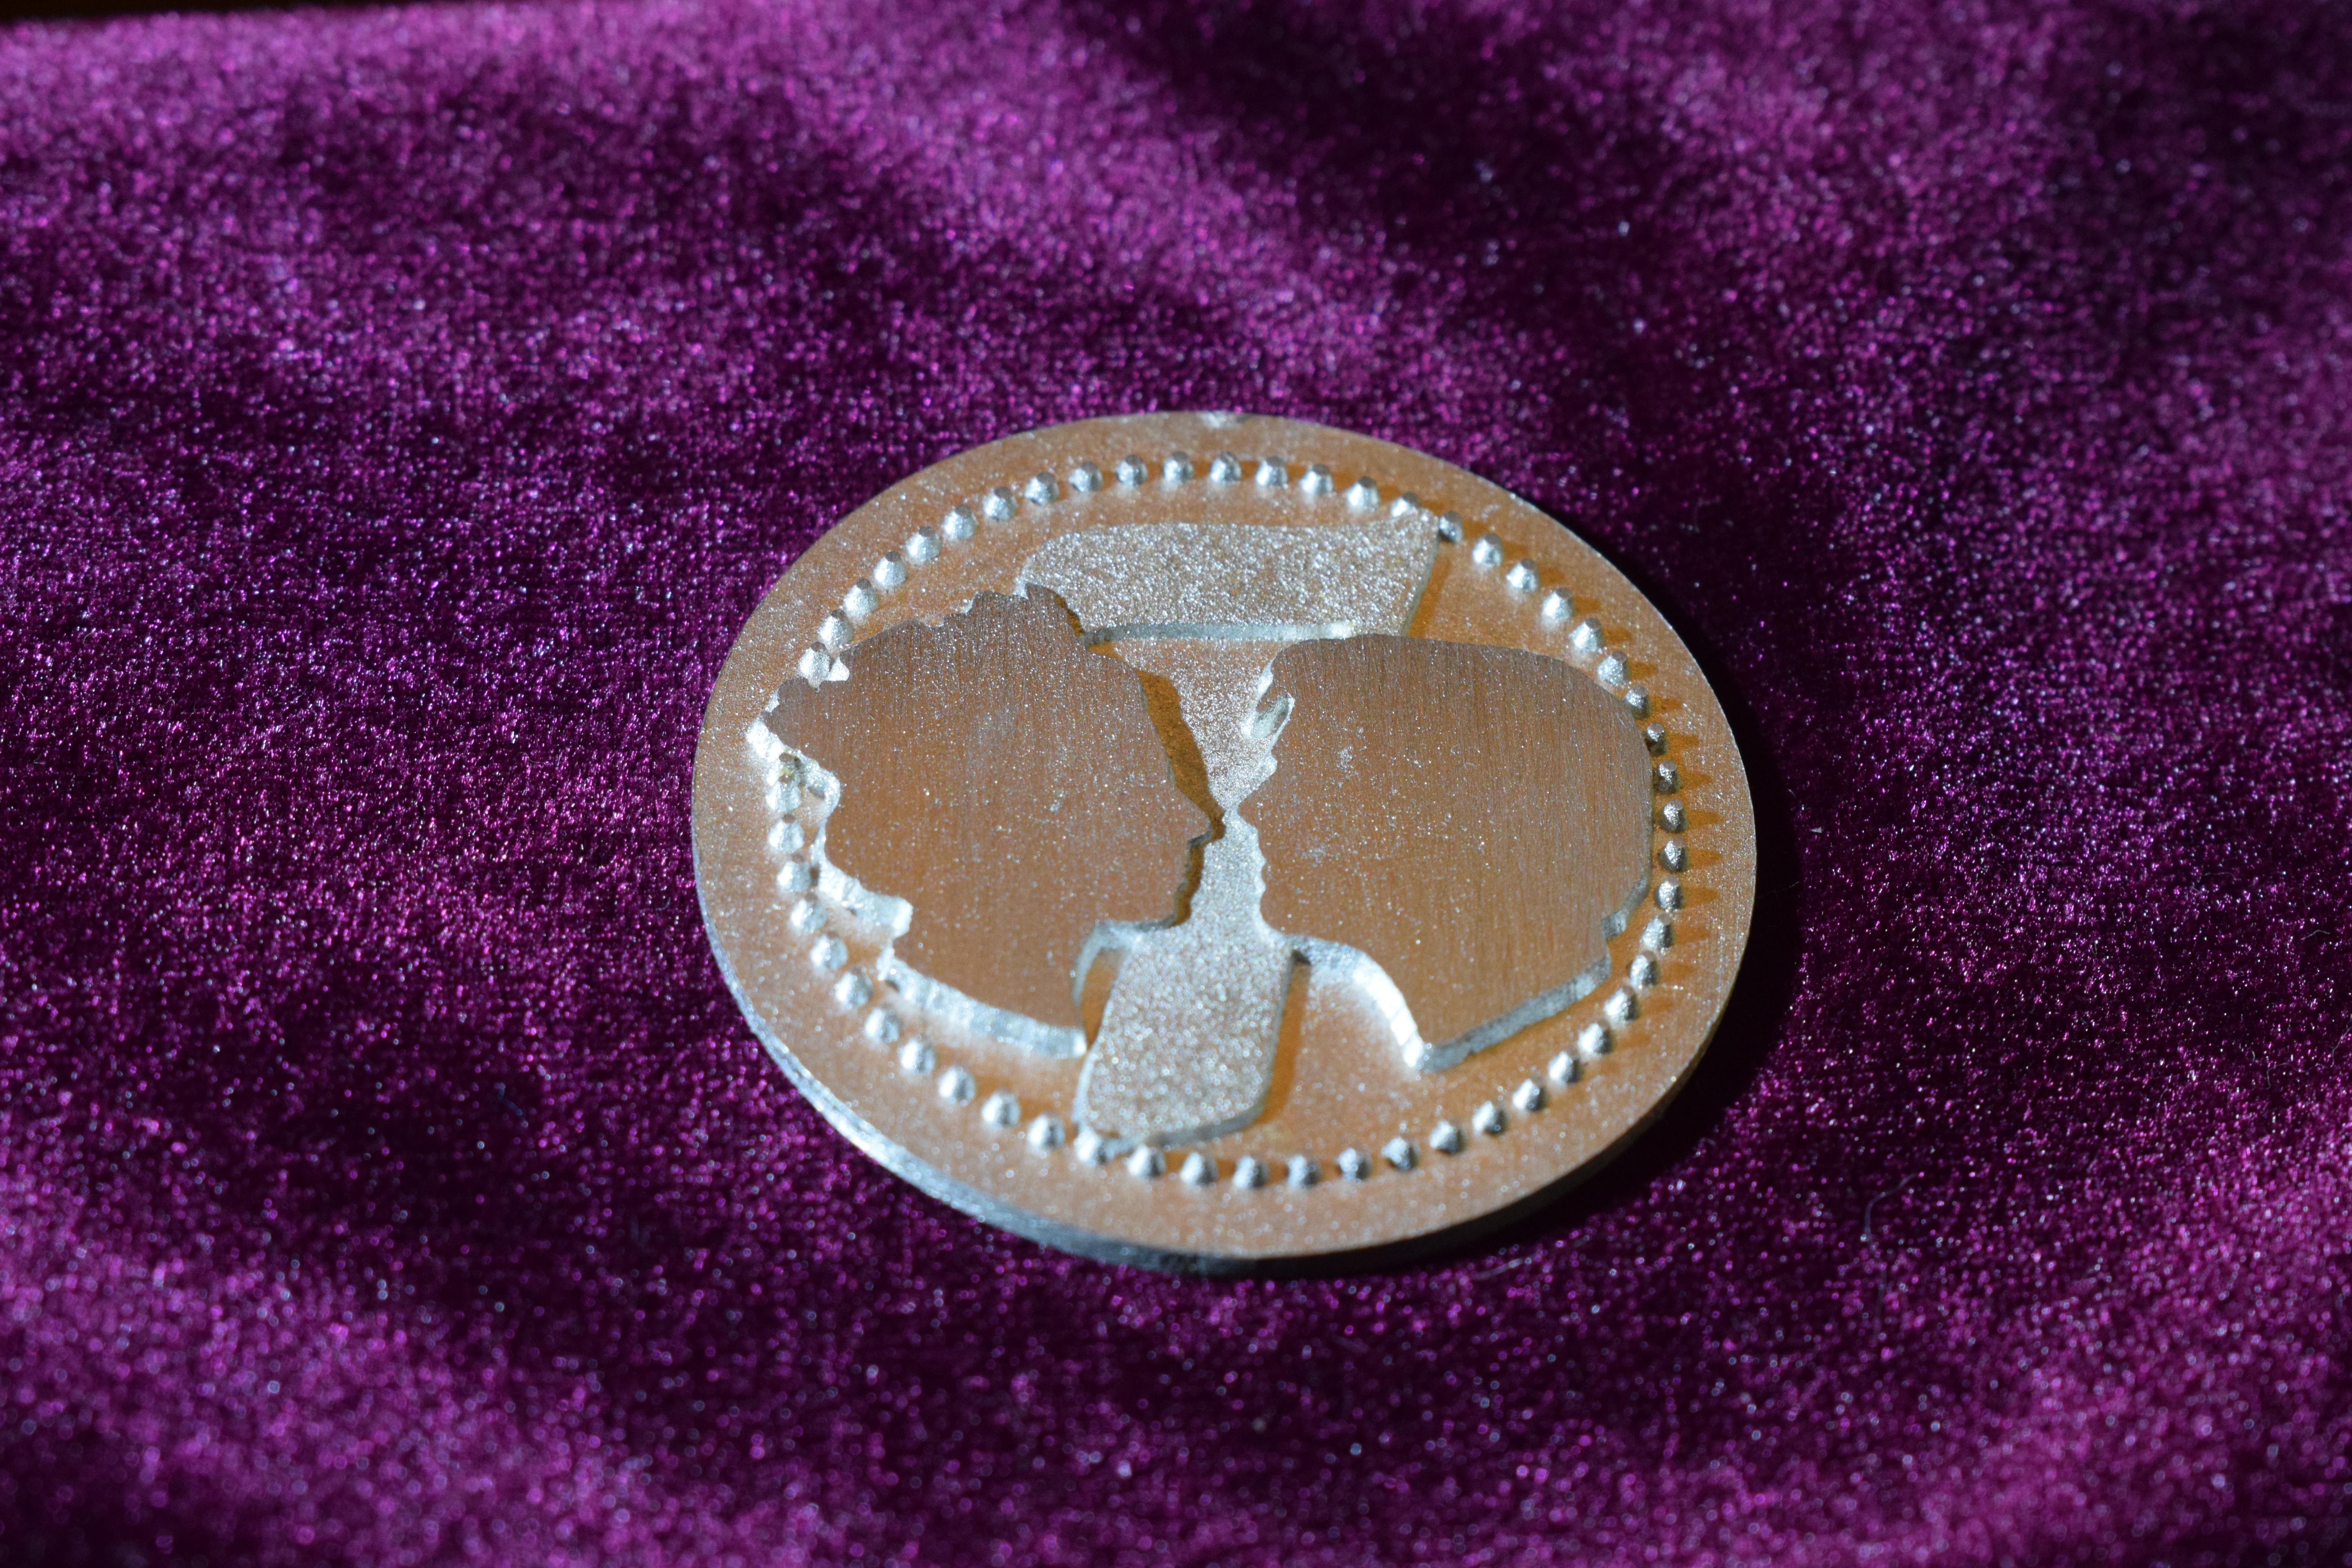 Item 125 - Misha and the Queen Commemorative Coin